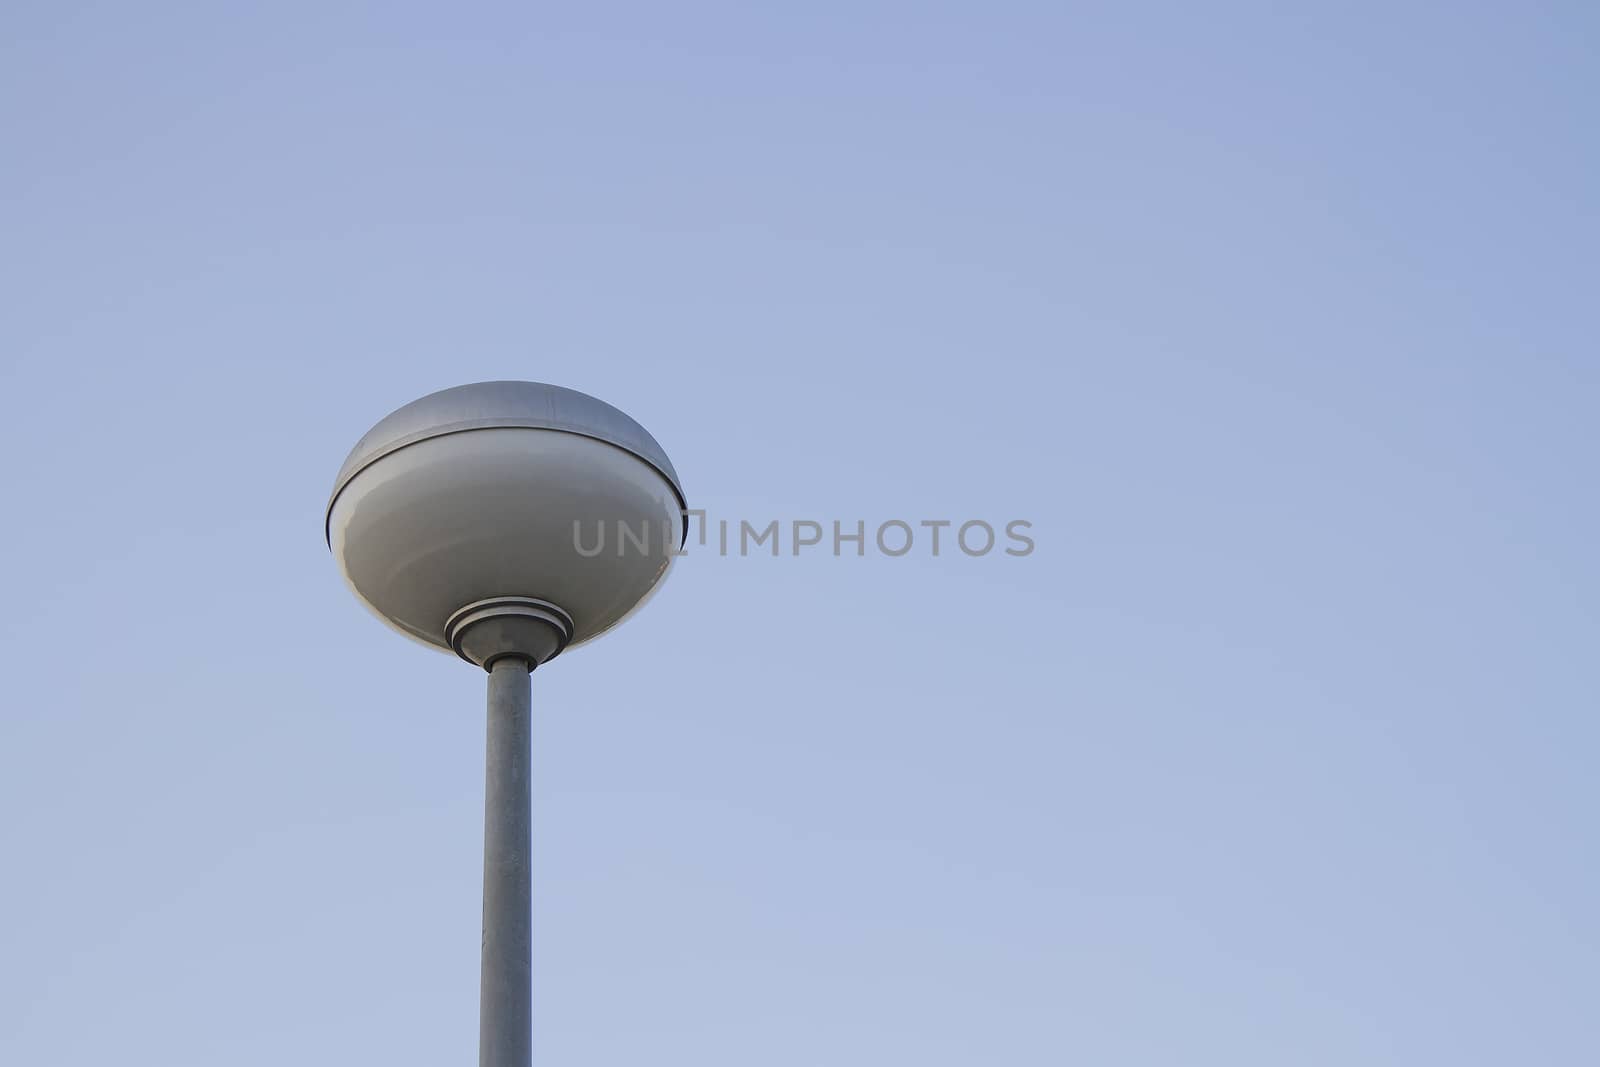 Light Post With Blue Sky Background and multi light 